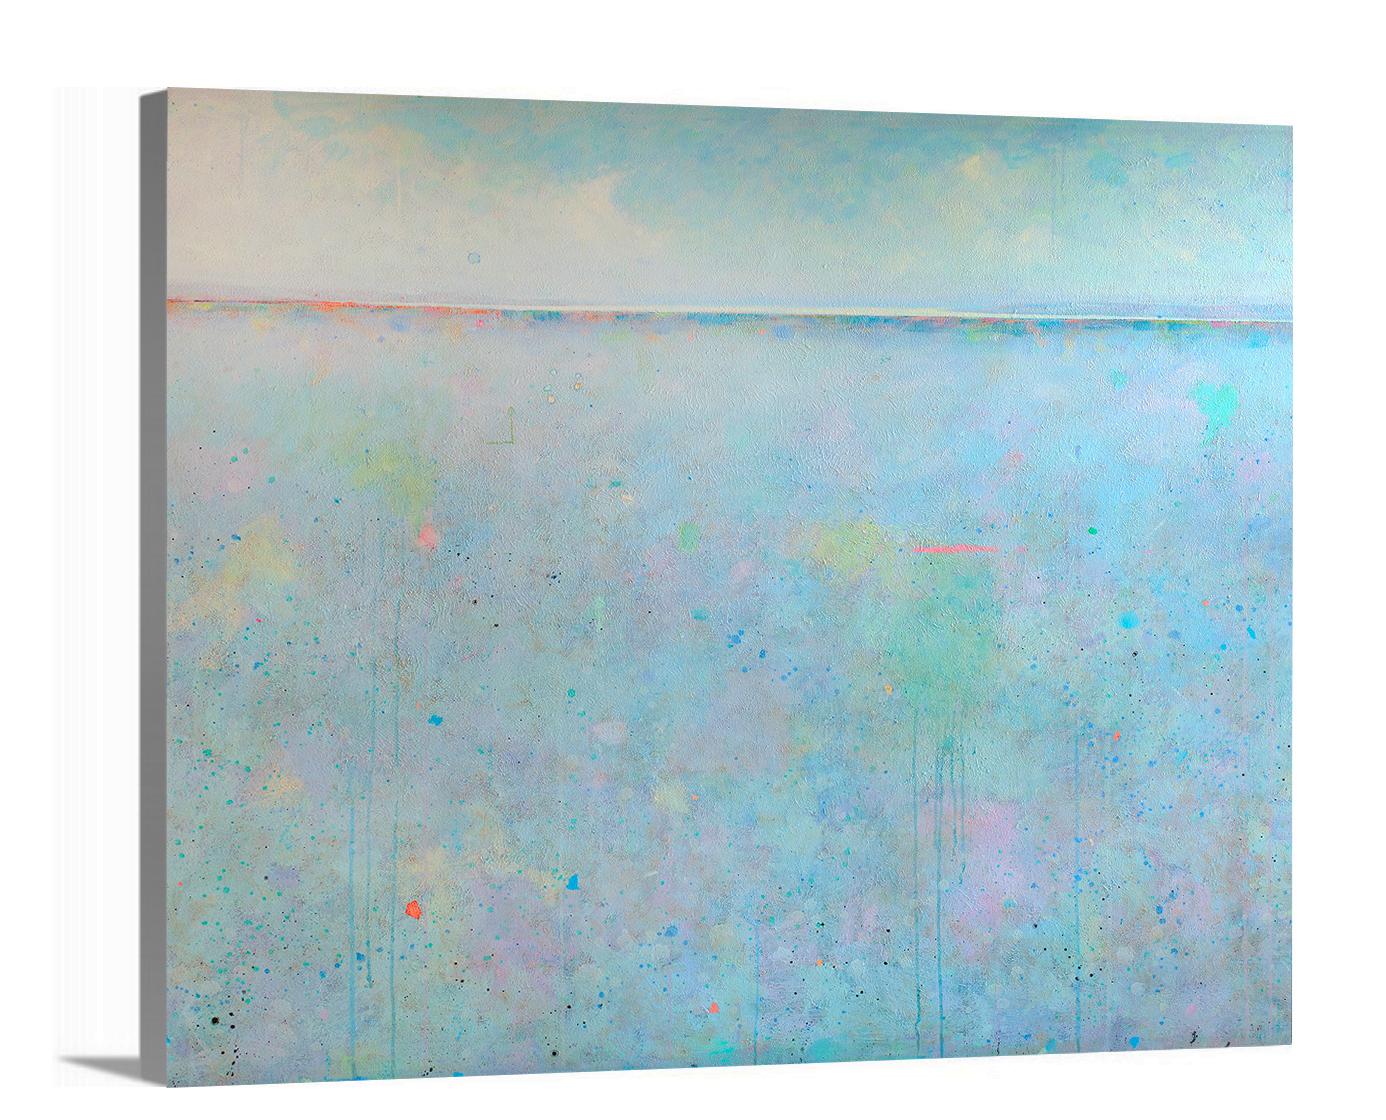 This abstract landscape limited edition print by Elwood Howell features a high horizon line, and a light blue palette.  The foreground portion of the composition beneath the horizon line features specks of bright colors and drips throughout. 

An